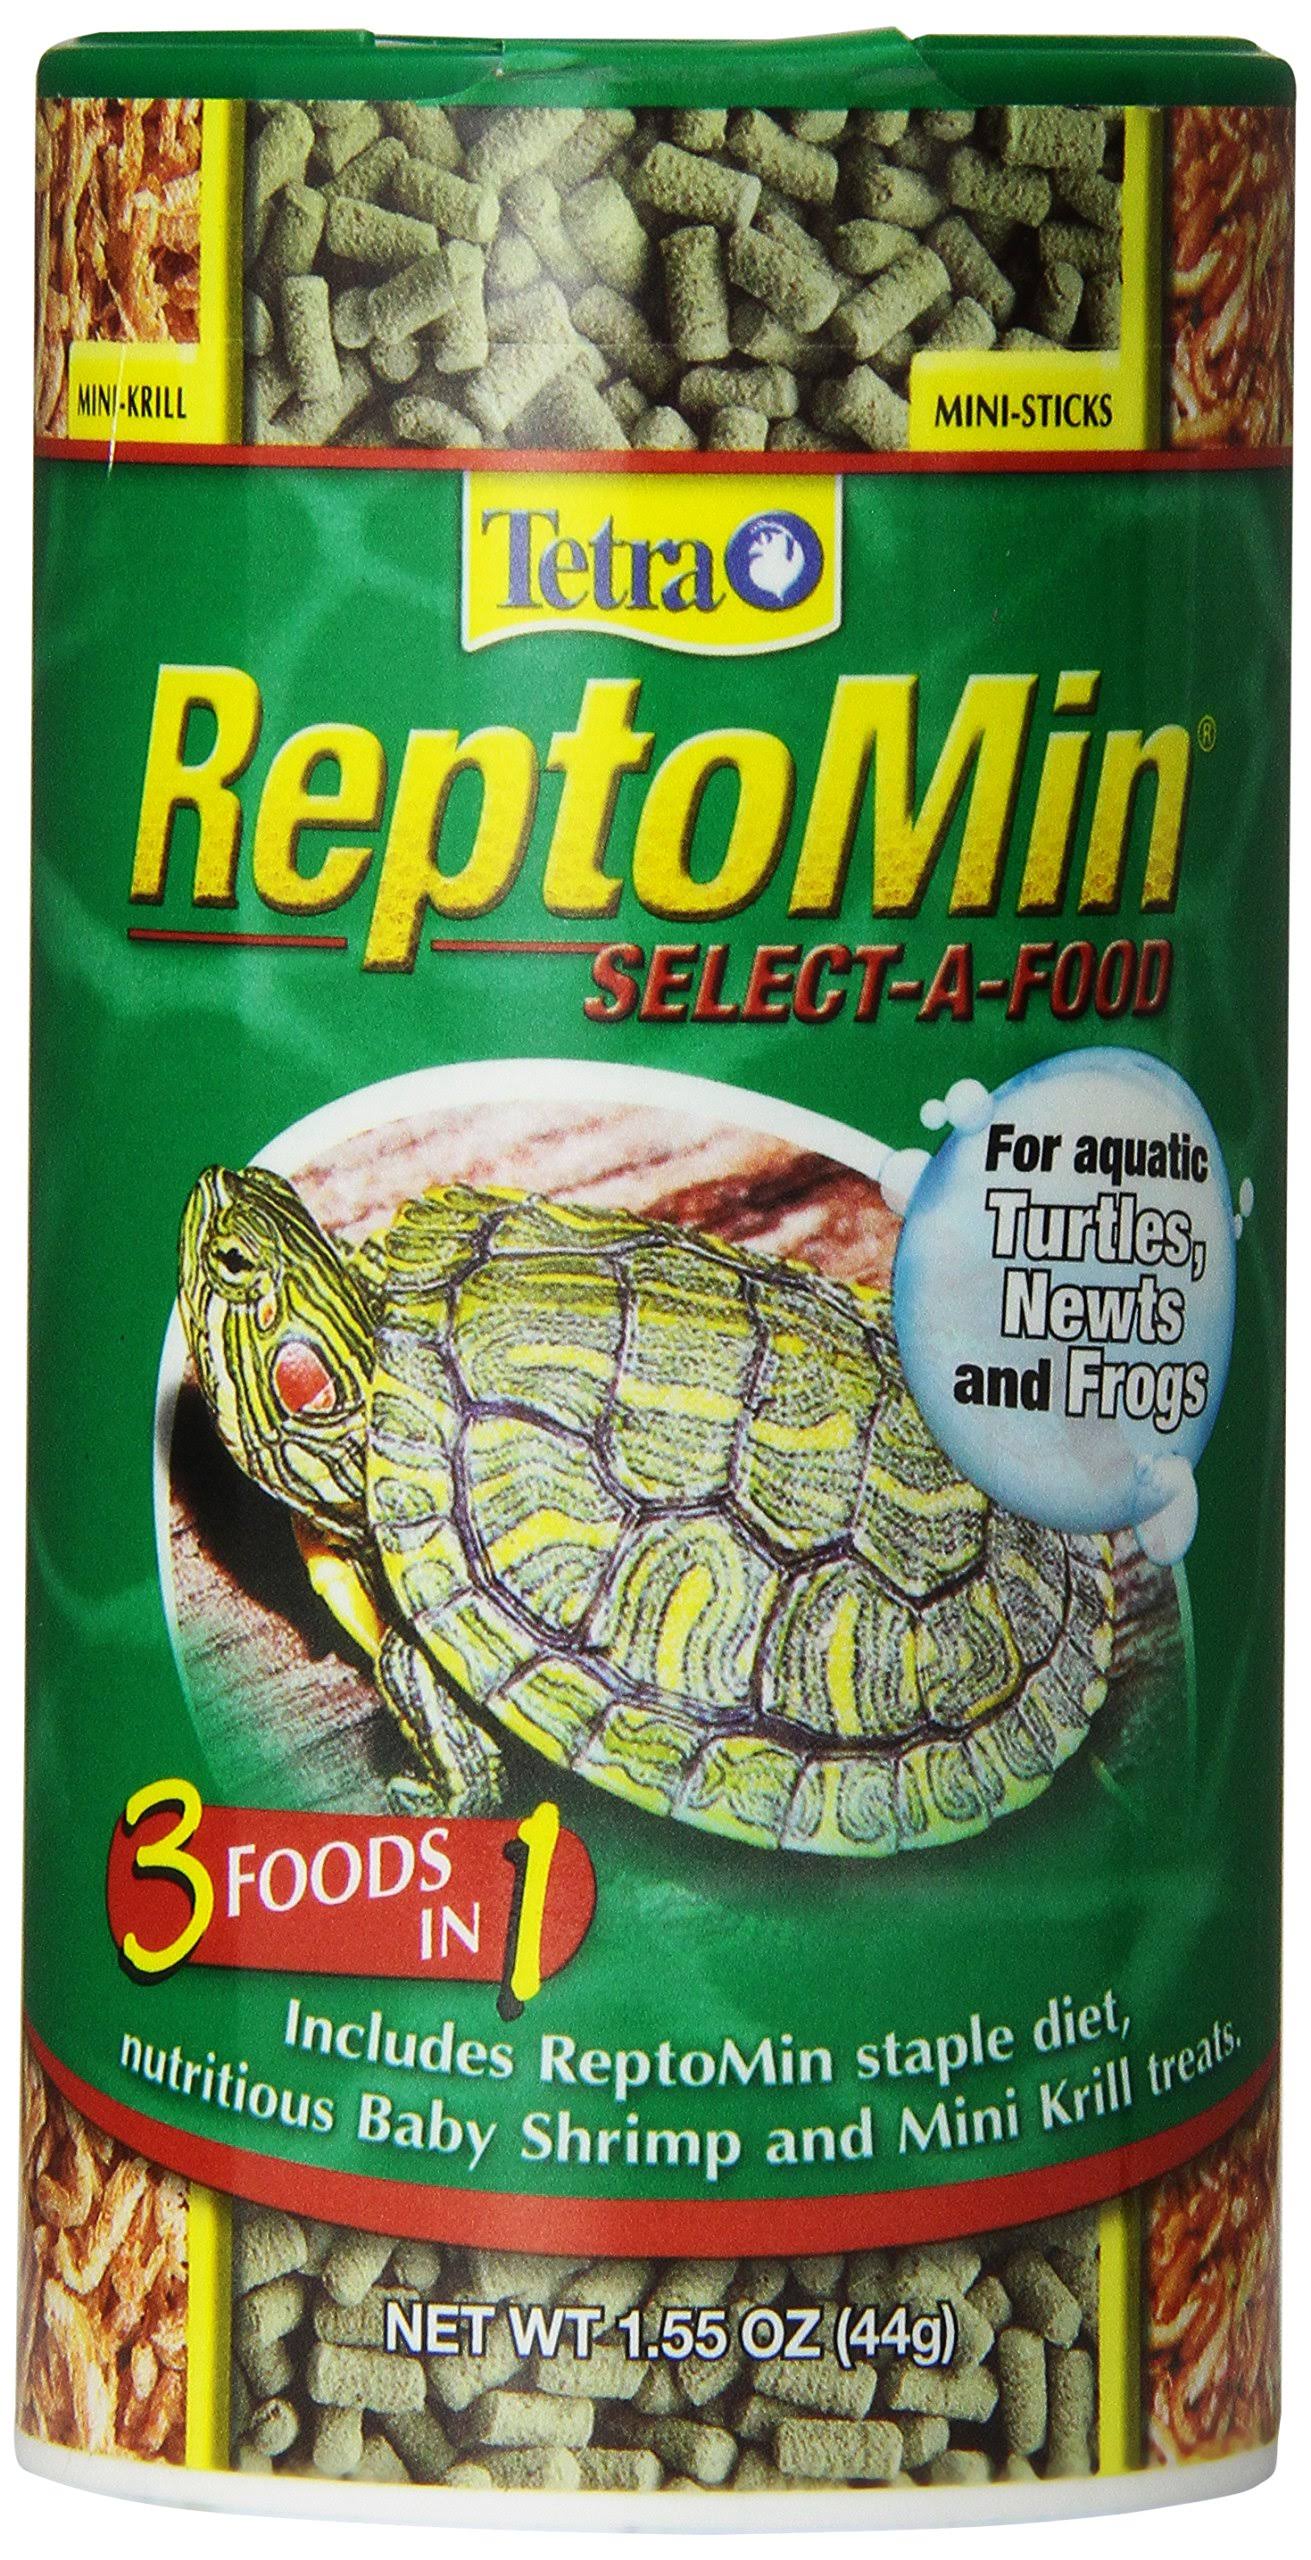 Tetra 3 Foods in 1 ReptoMin Select-A-Food - 1.55 oz